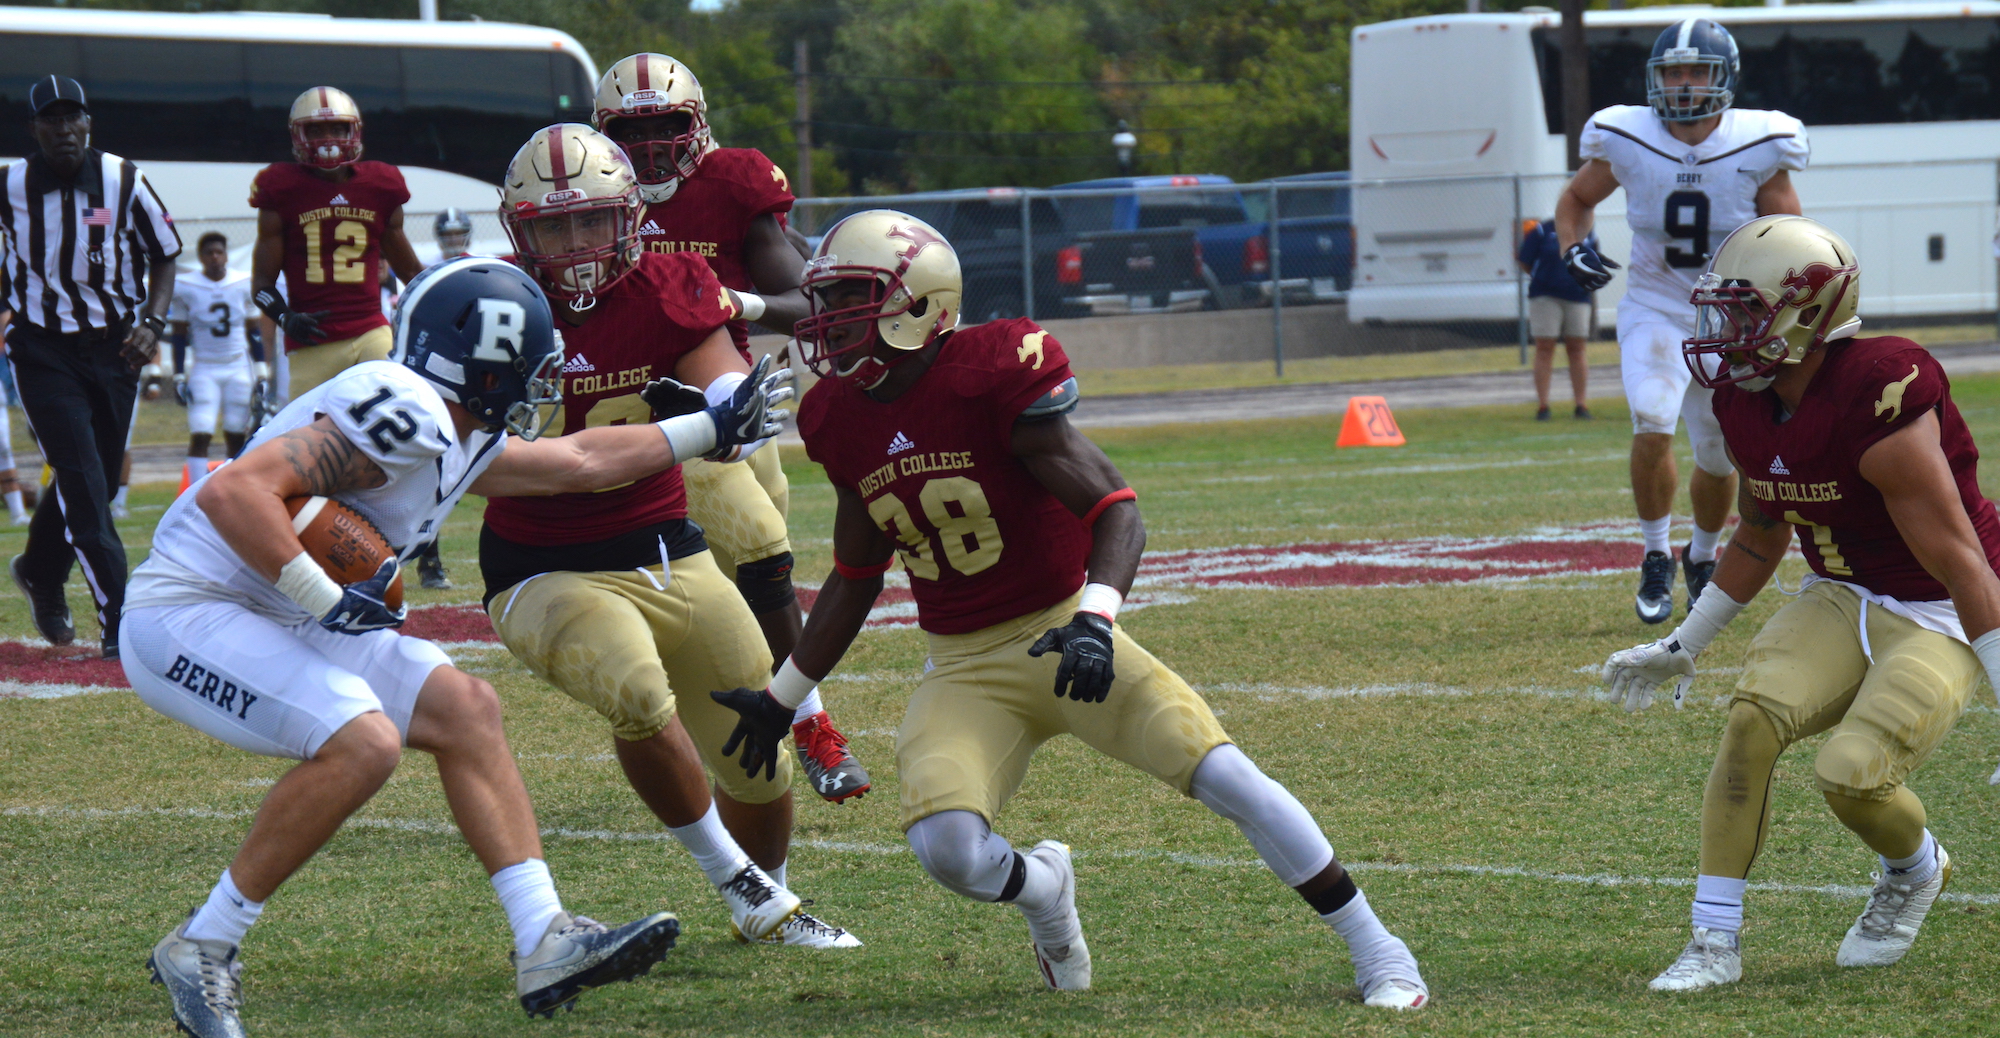 Turnovers Doom 'Roo Football in Loss to Berry